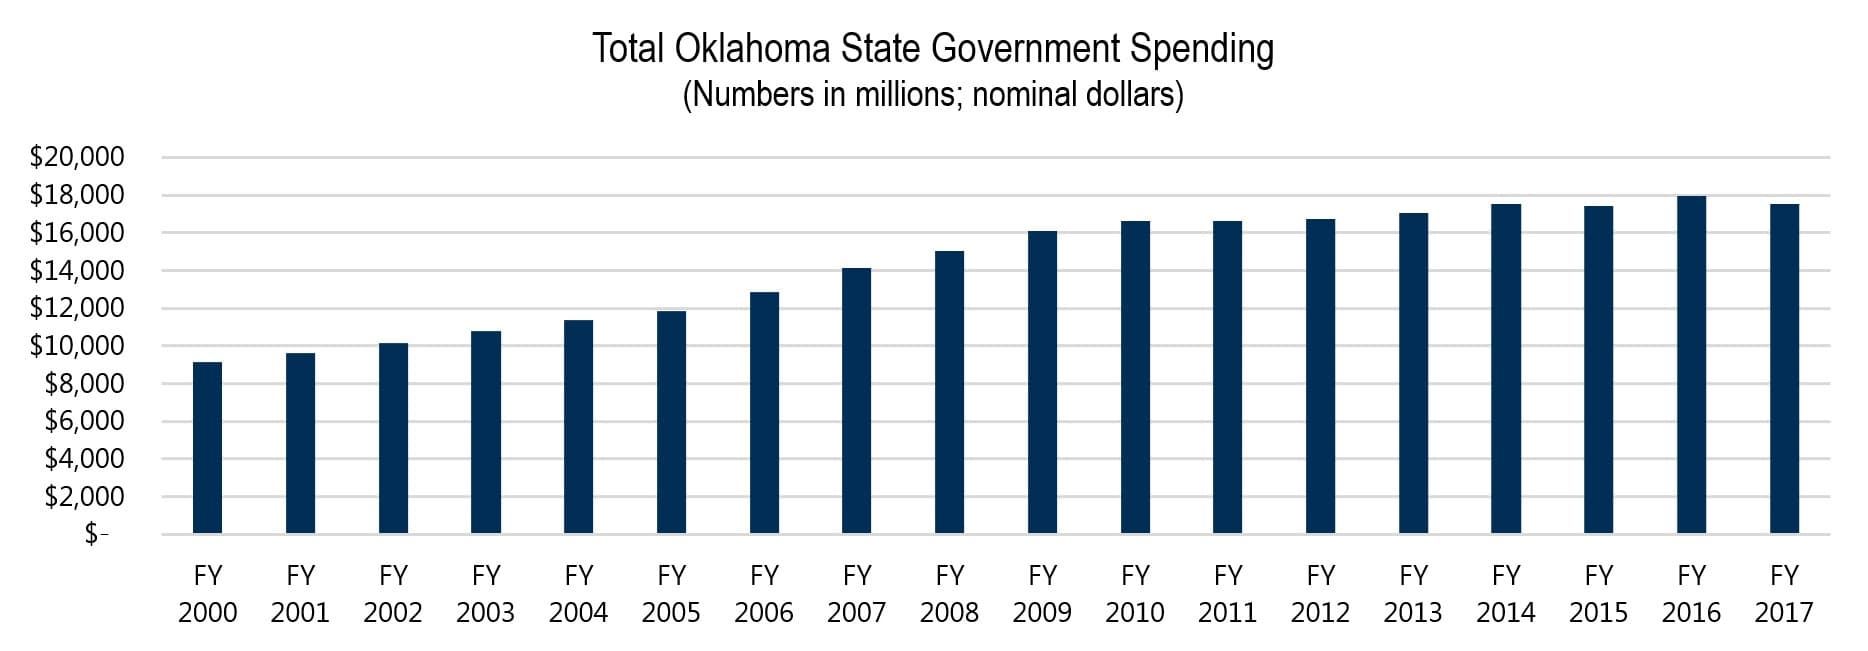 Total Oklahoma State Government Spending